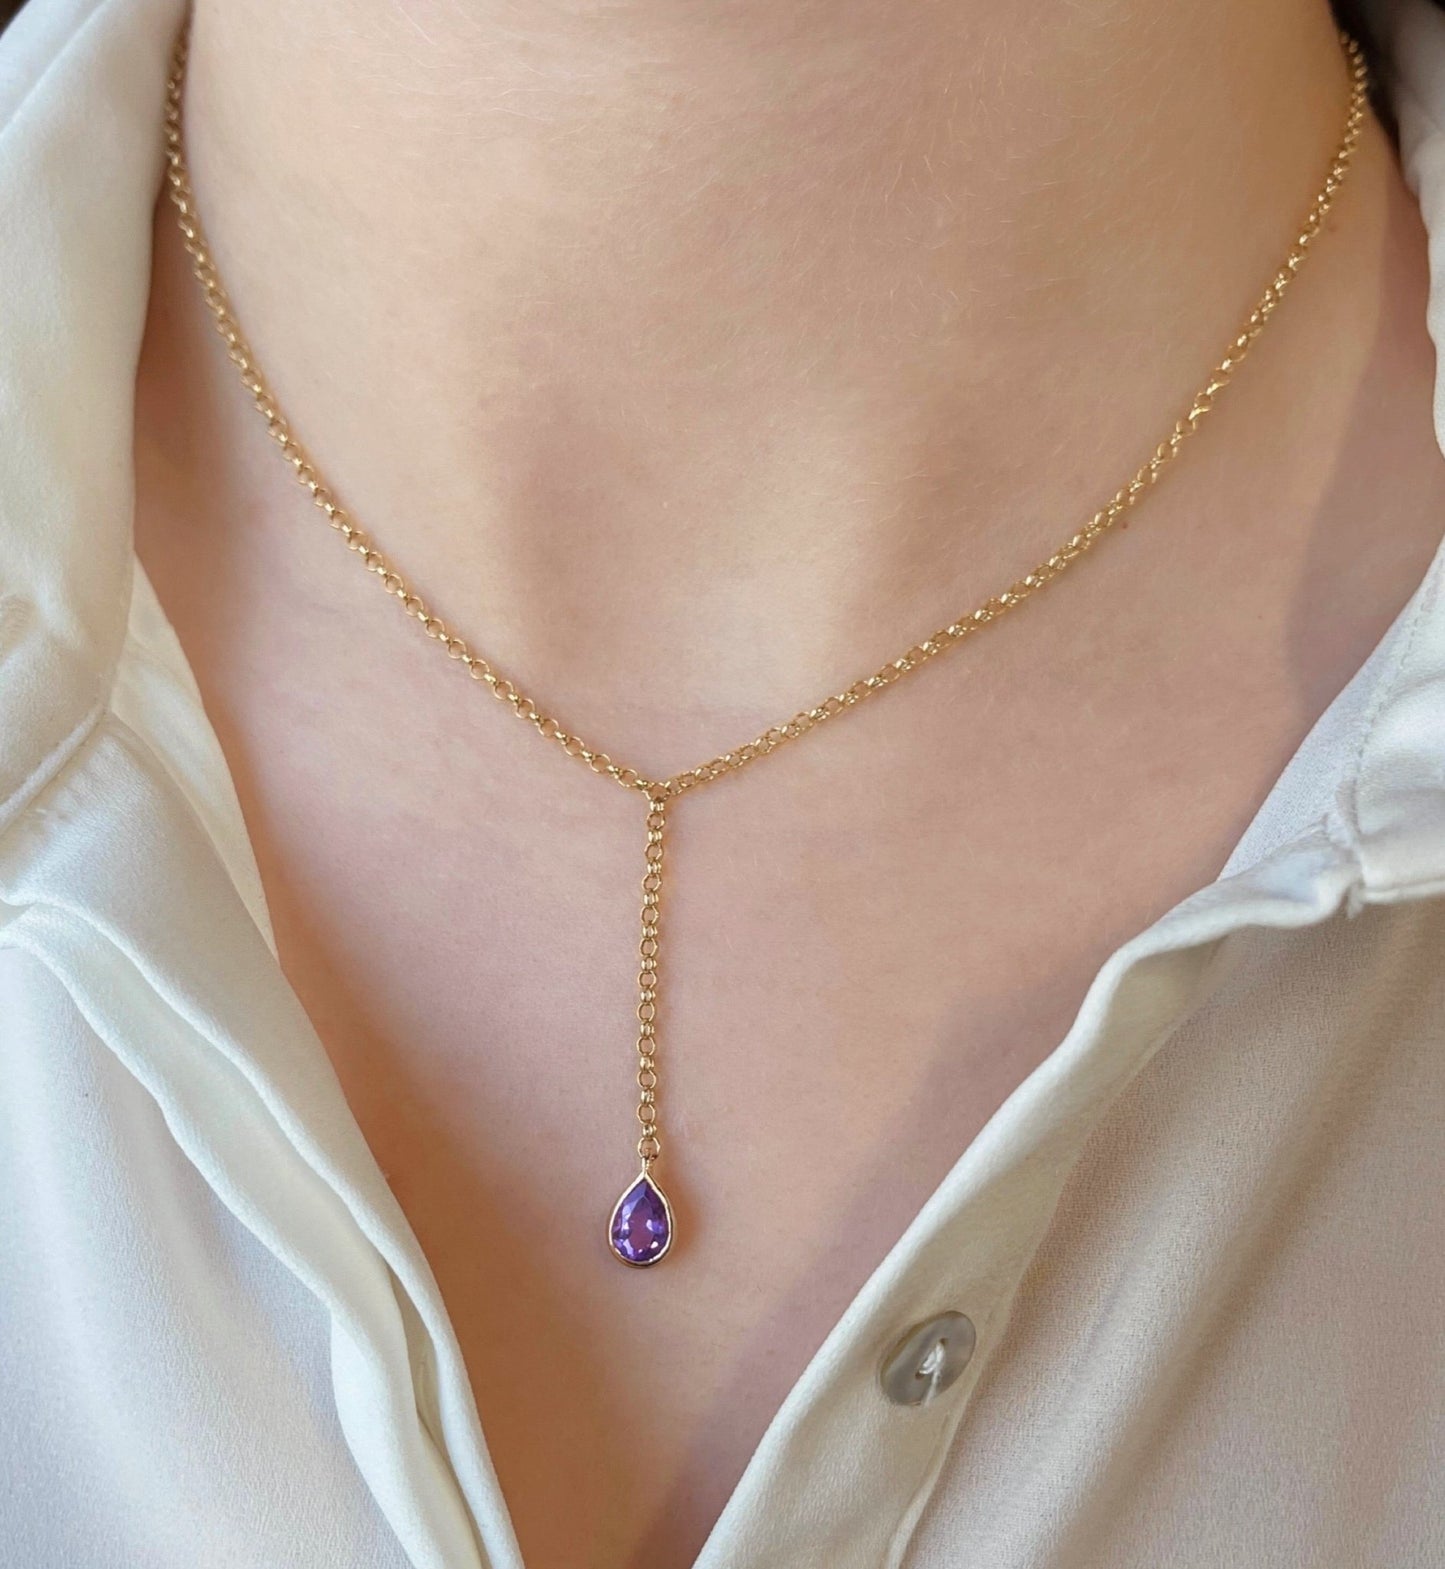 Louise Necklace in Amethyst - 18k Gold - Lynor